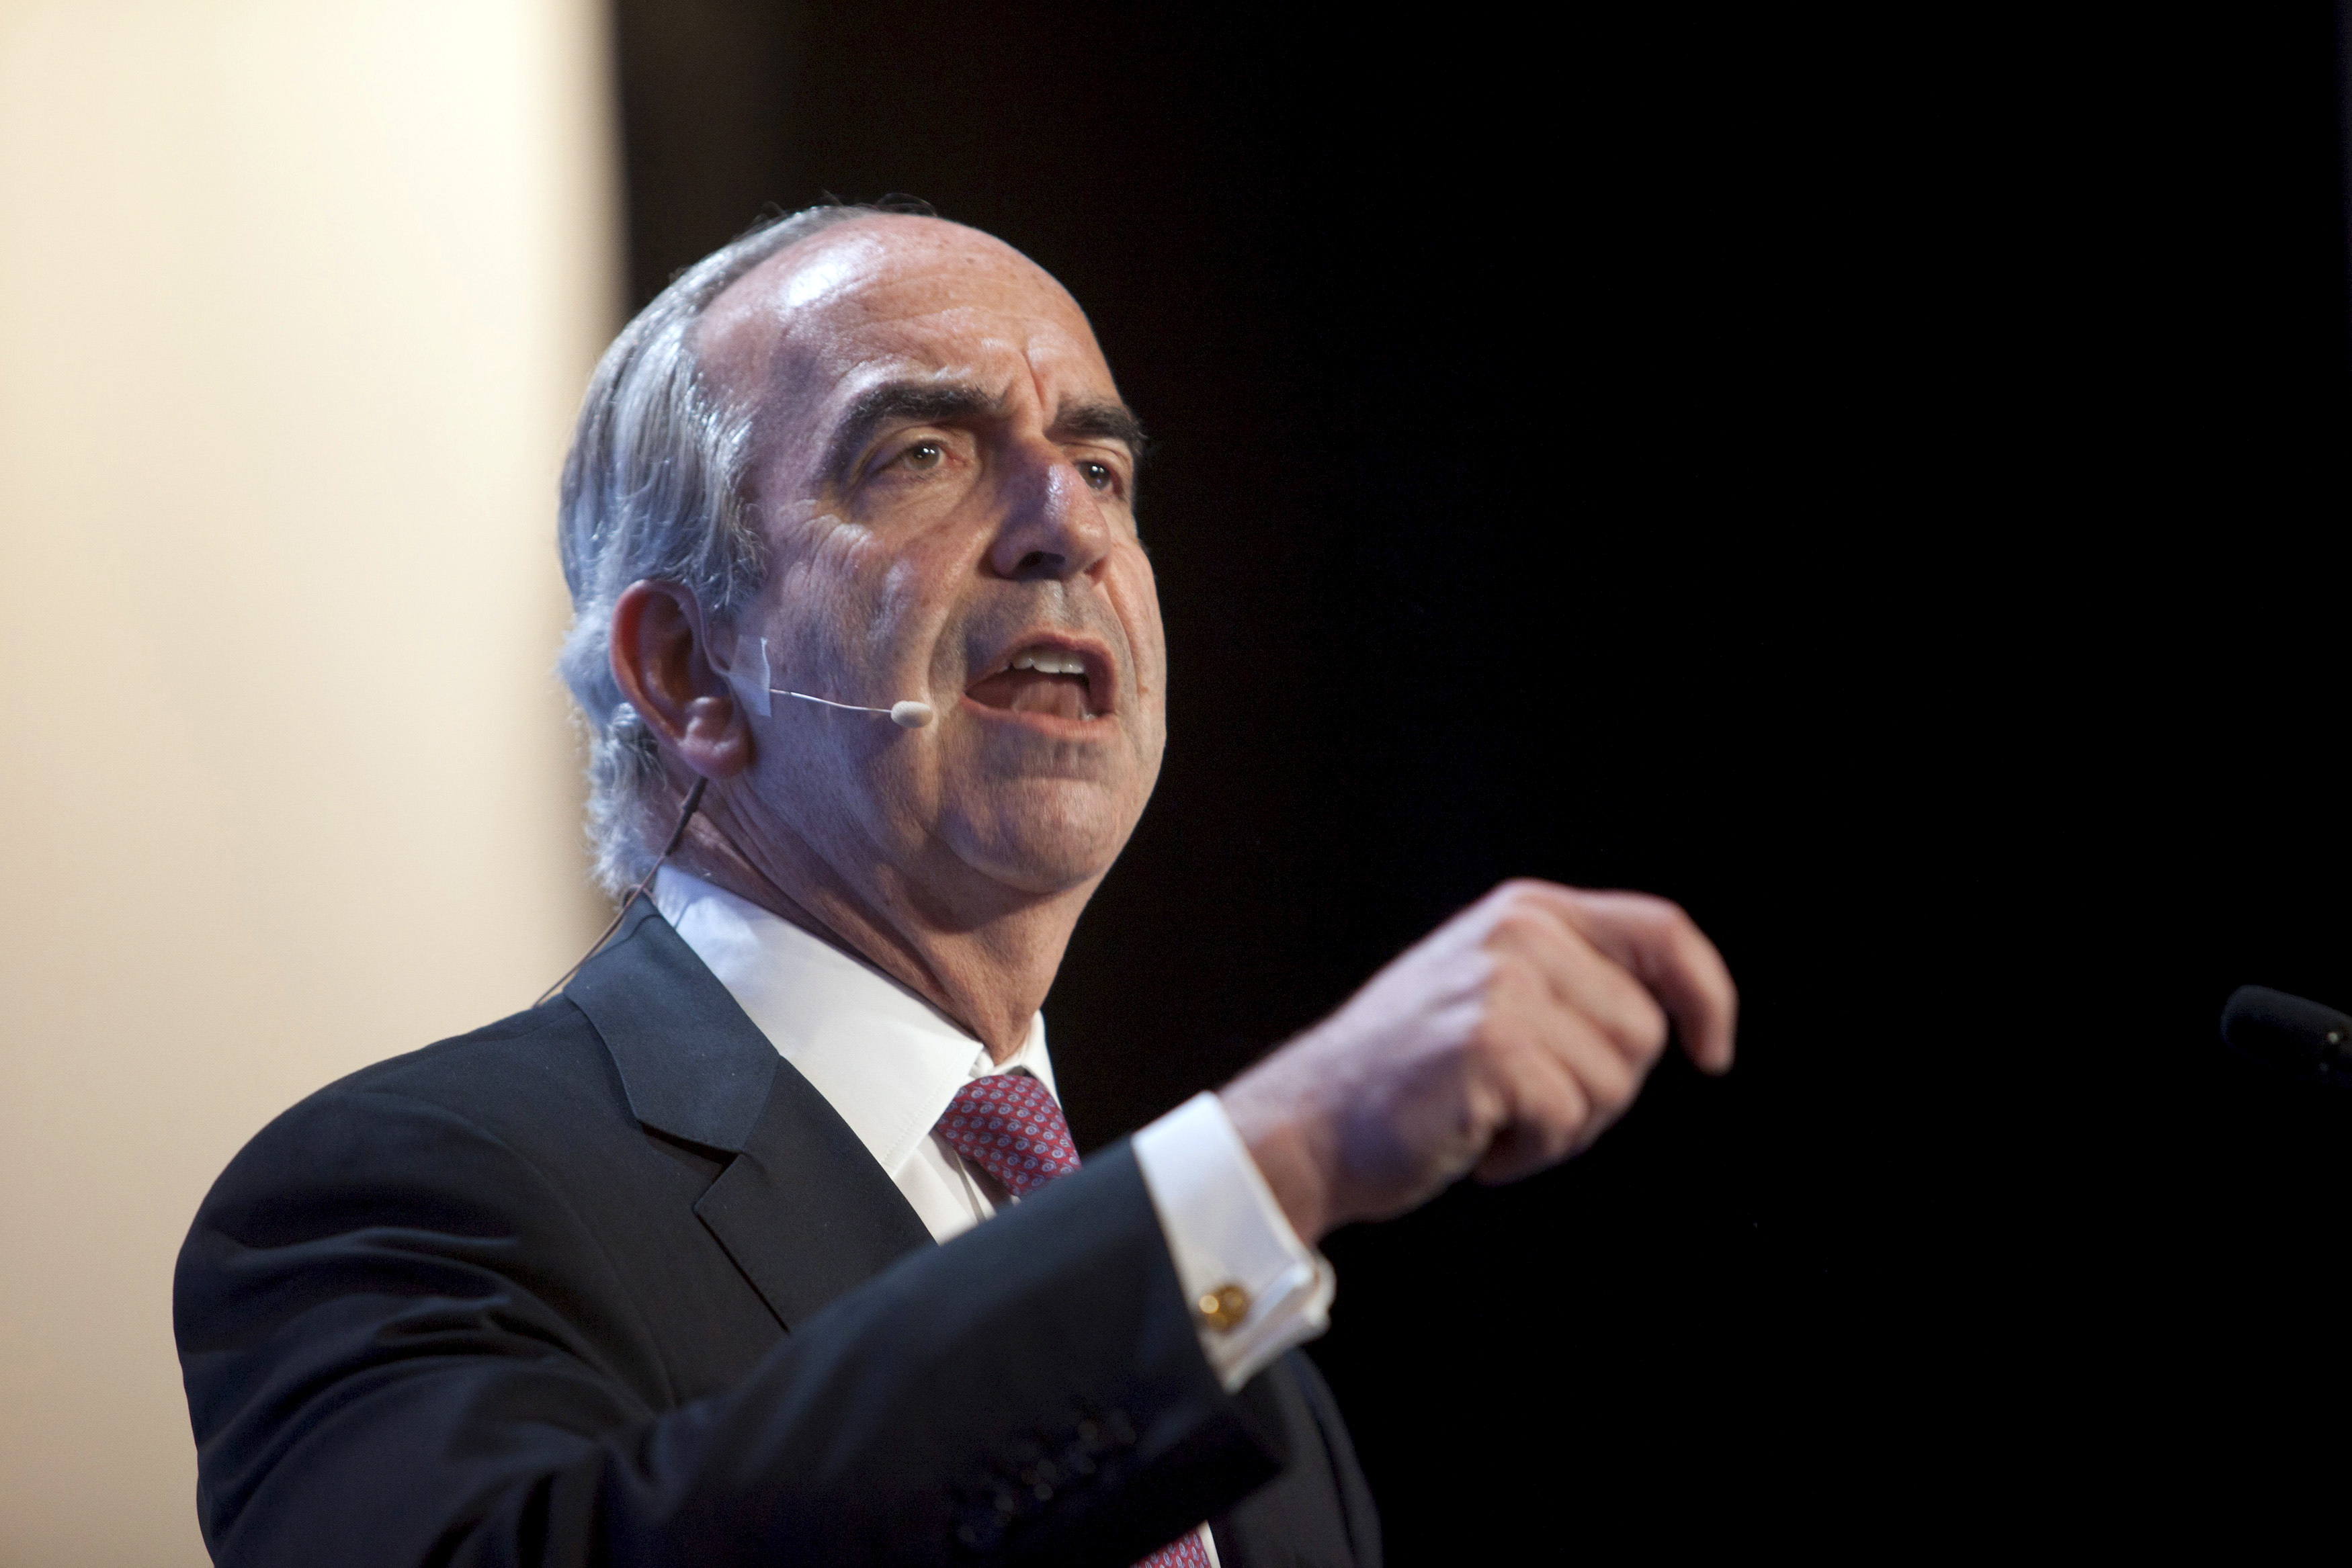 John Hess, CEO of the Hess Corporation, speaks during the IHS CERAWeek 2015 energy conference in Houston